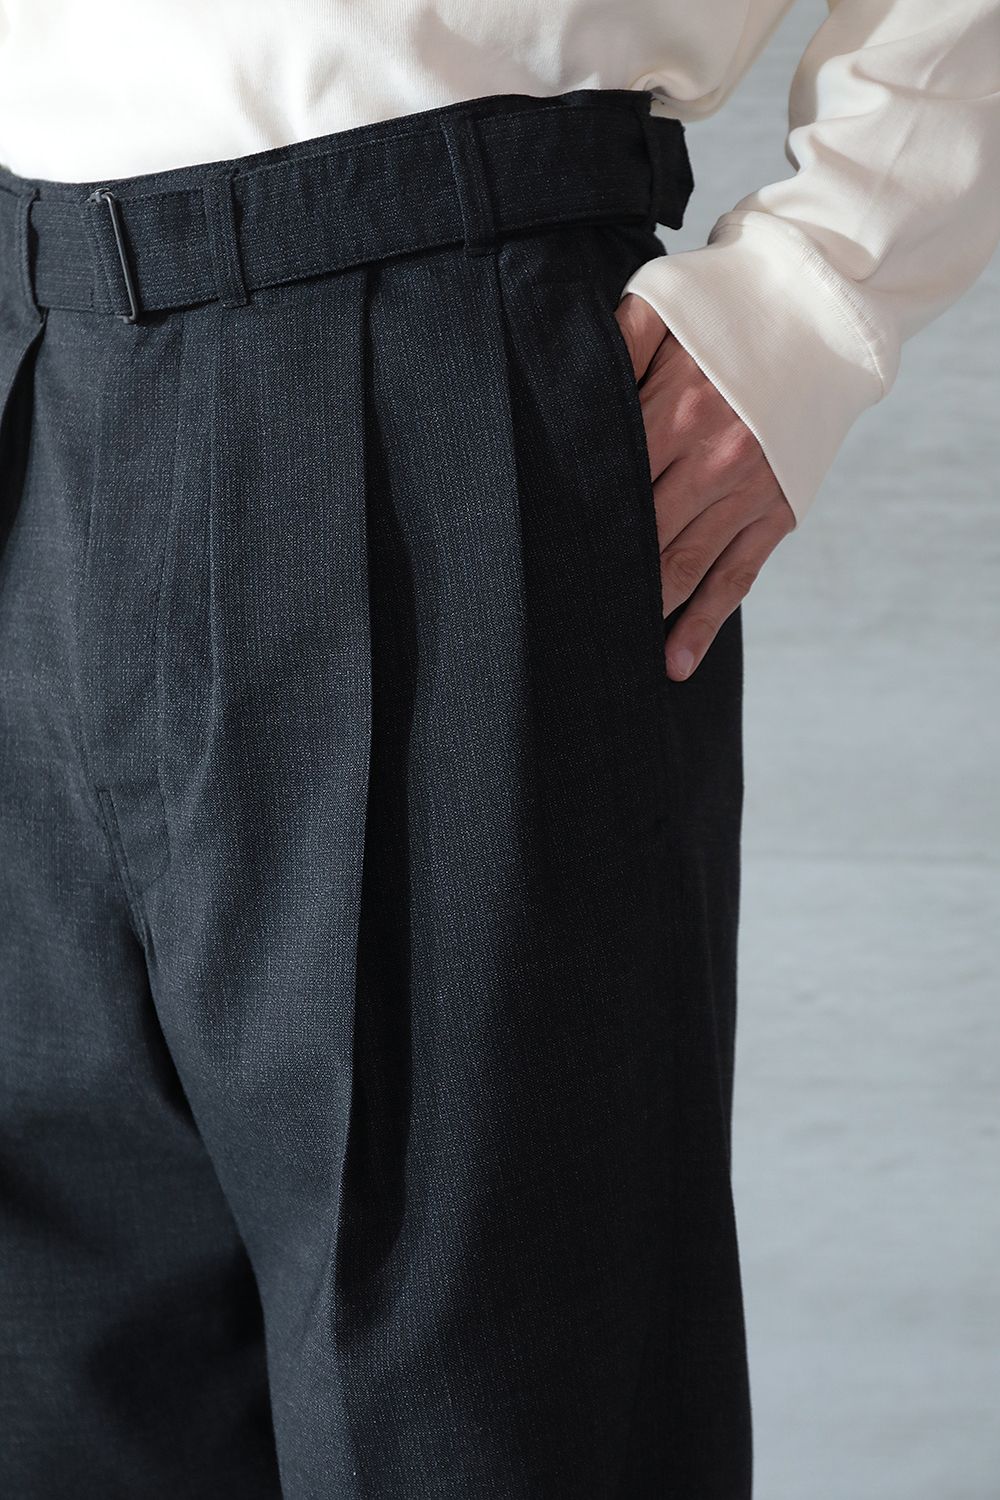 lemaire 22aw loose pleated pants